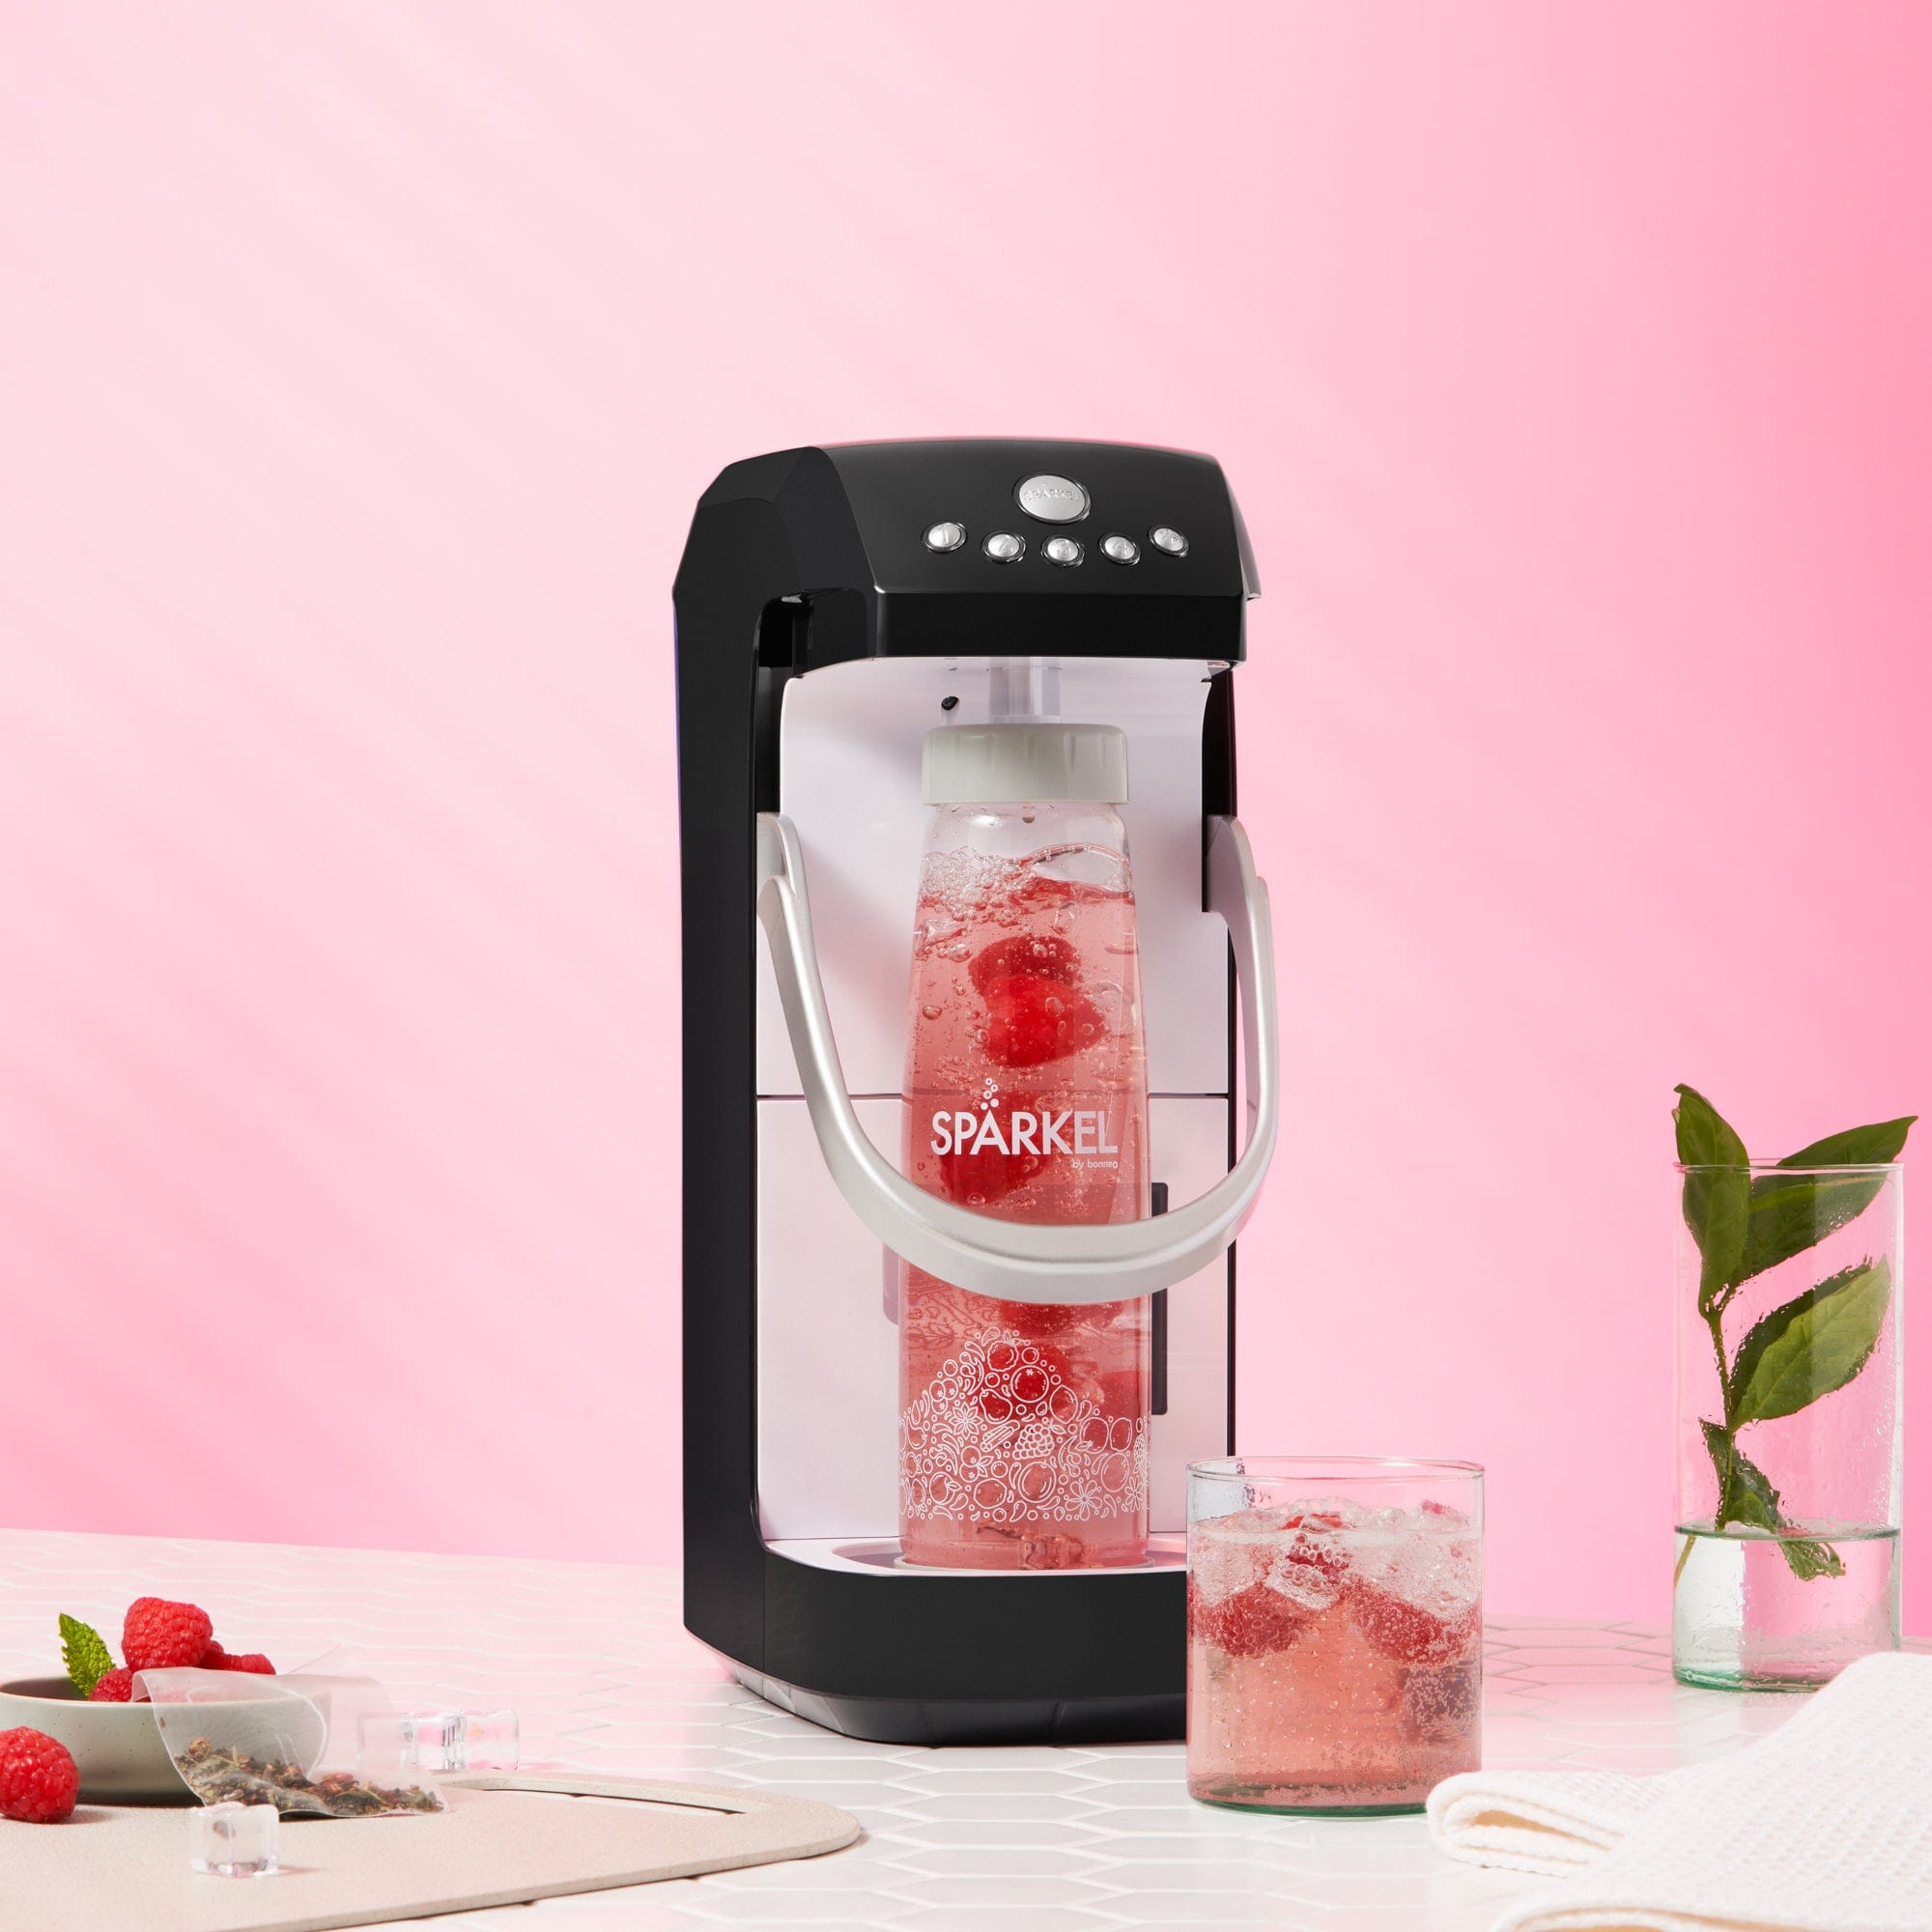 Spärkel - Make delicious bubbly drinks with your favourite